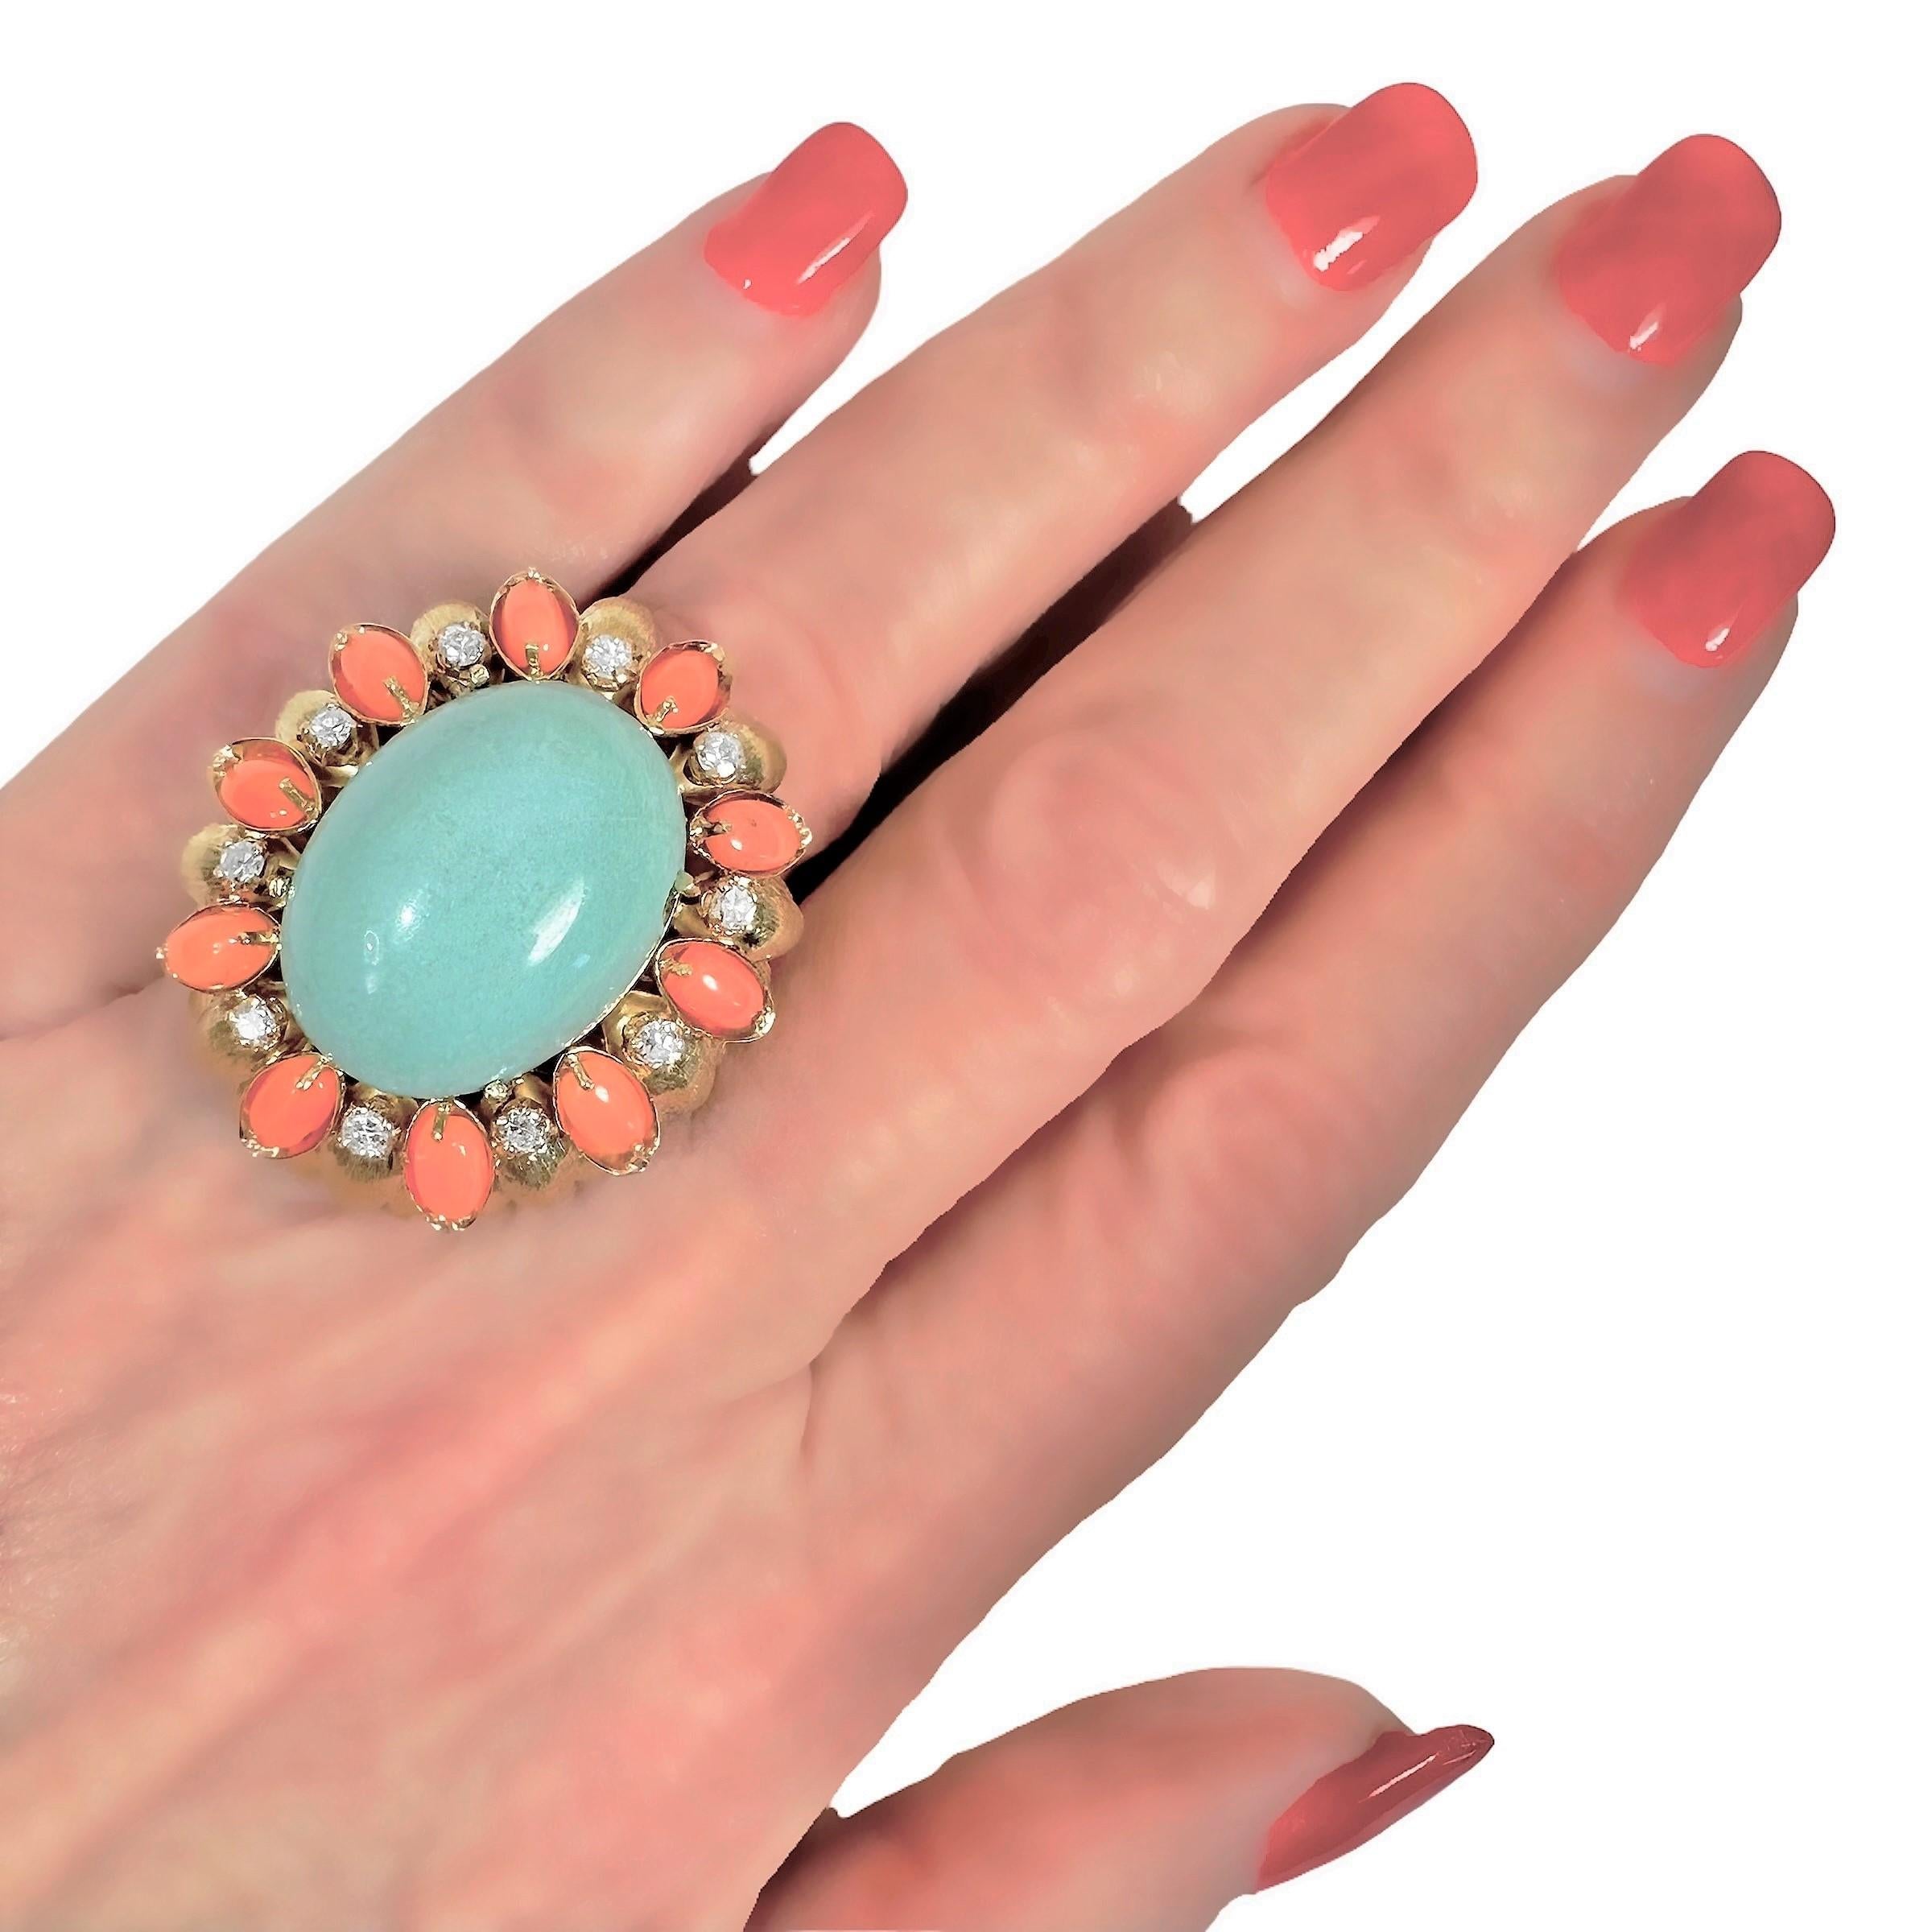 Large Scale Mid-20th Century 18K Yellow Gold, Coral, Turquoise and Diamond Ring 3